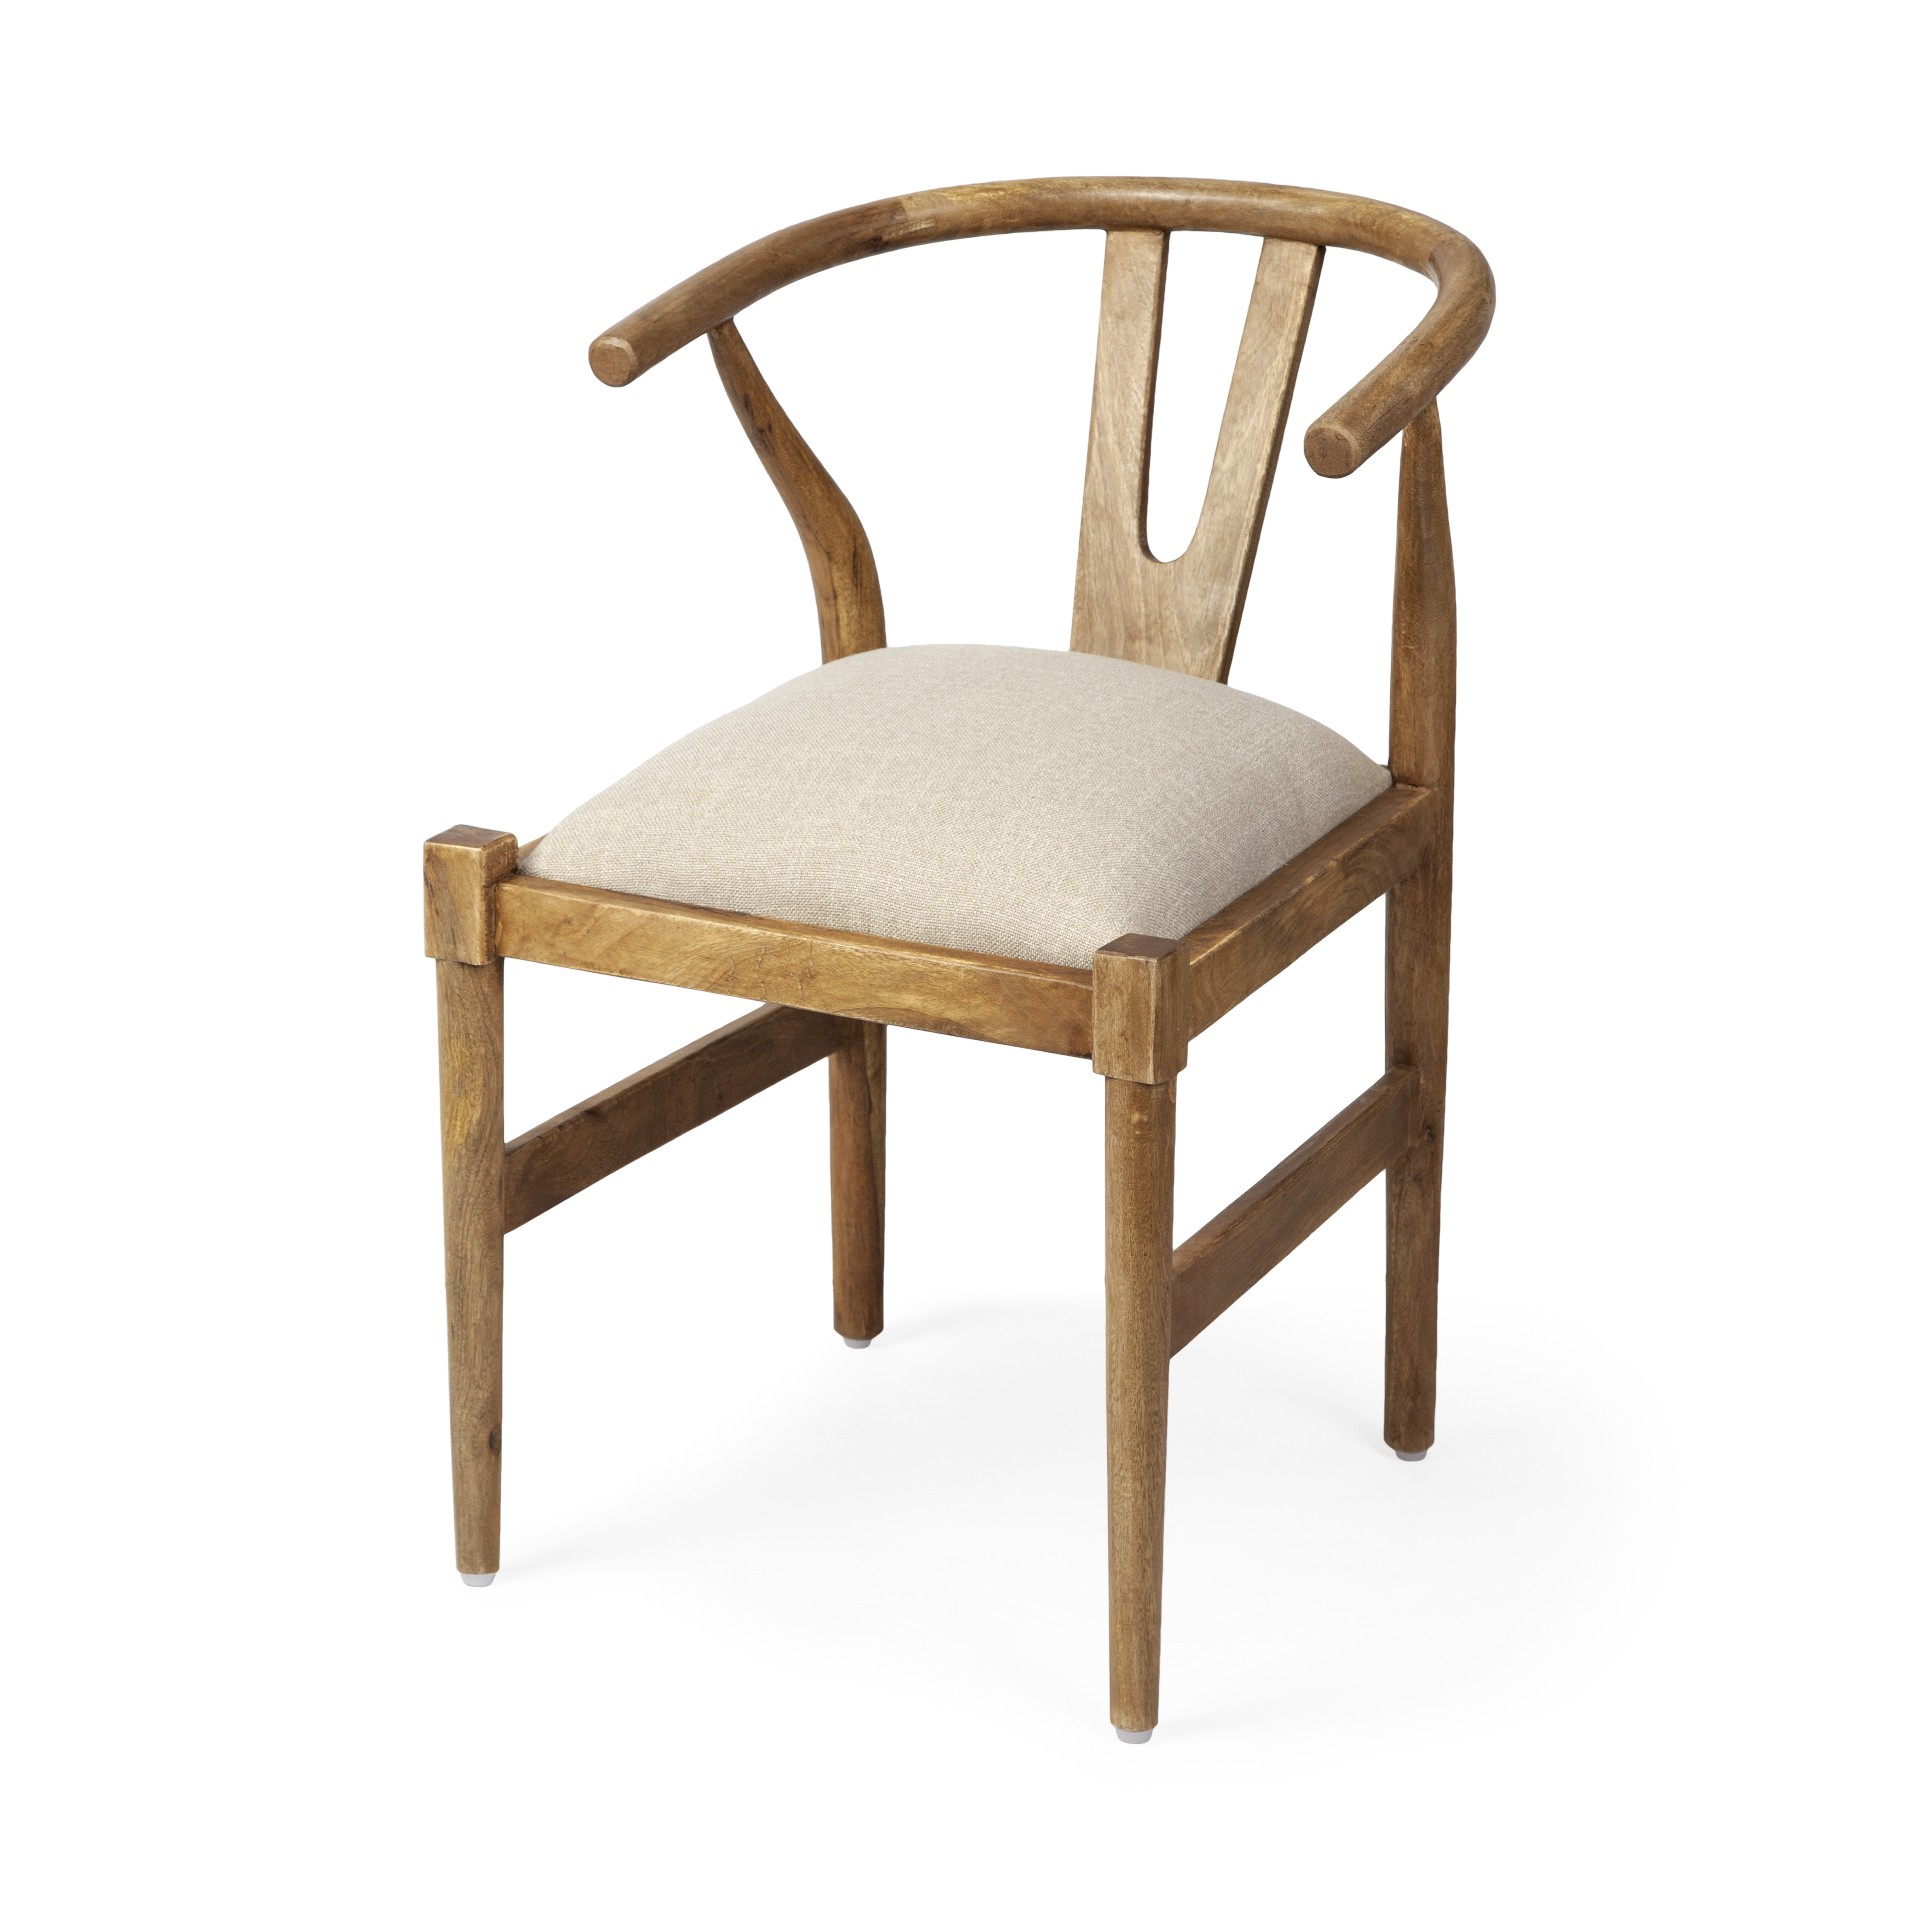 Natural Linen Seat with Light Brown Wooden Frame Dining Chair